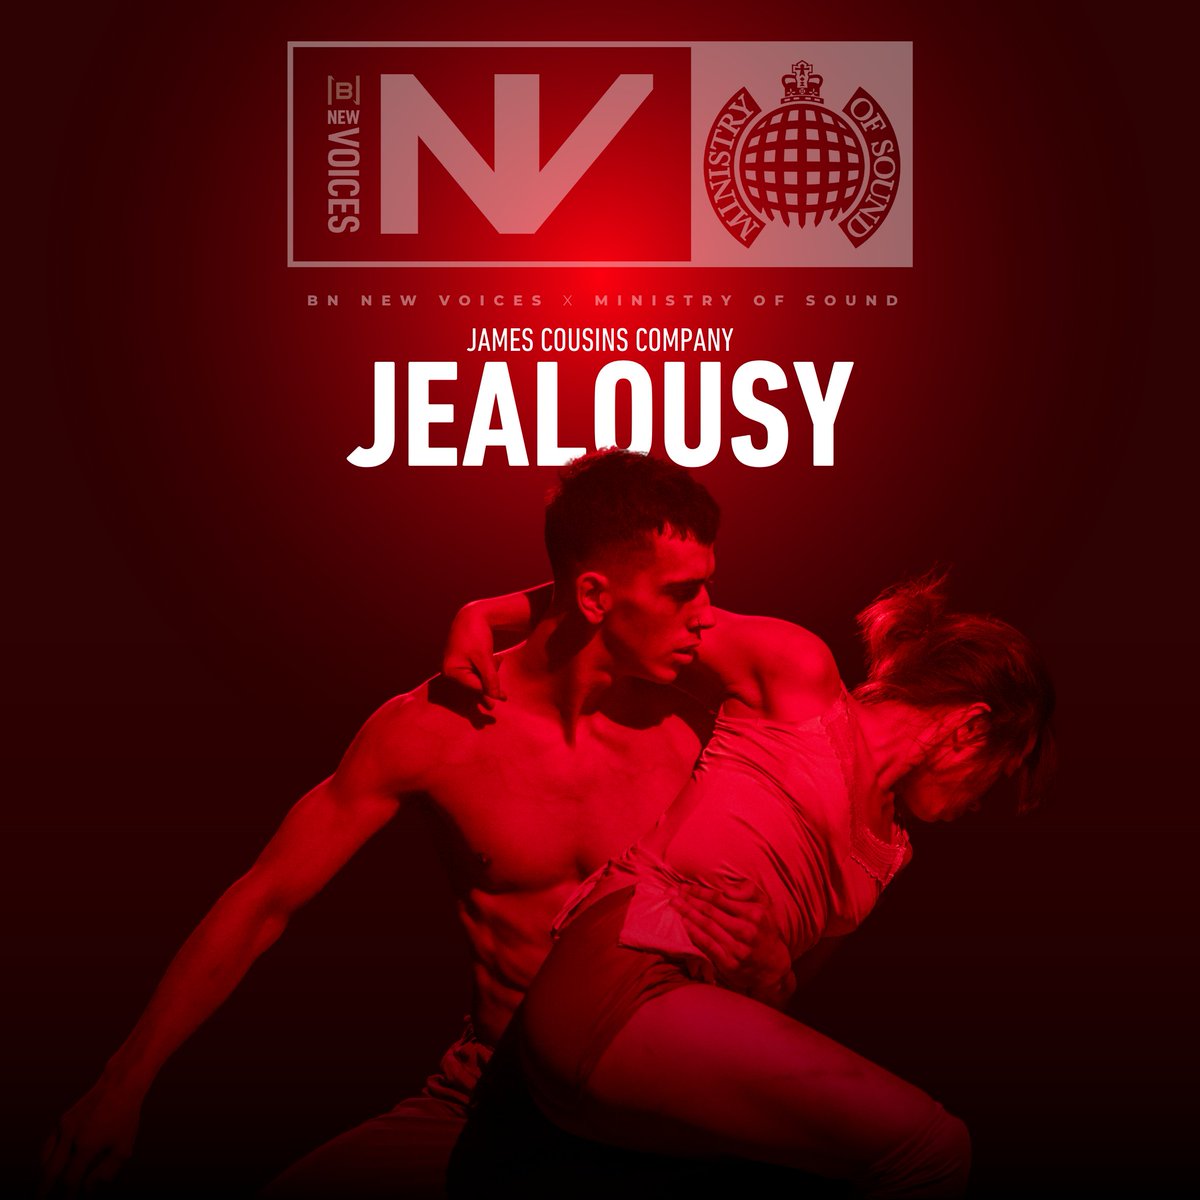 Introducing the Ballet Nights New Voices at Ministry of Sound... Jealousy, choreographed by Olivier award-winning choreographer James Cousins. Secure your tickets today and witness the electrifying show at Ministry of Sound... Book Now at balletnights.com/newvoices